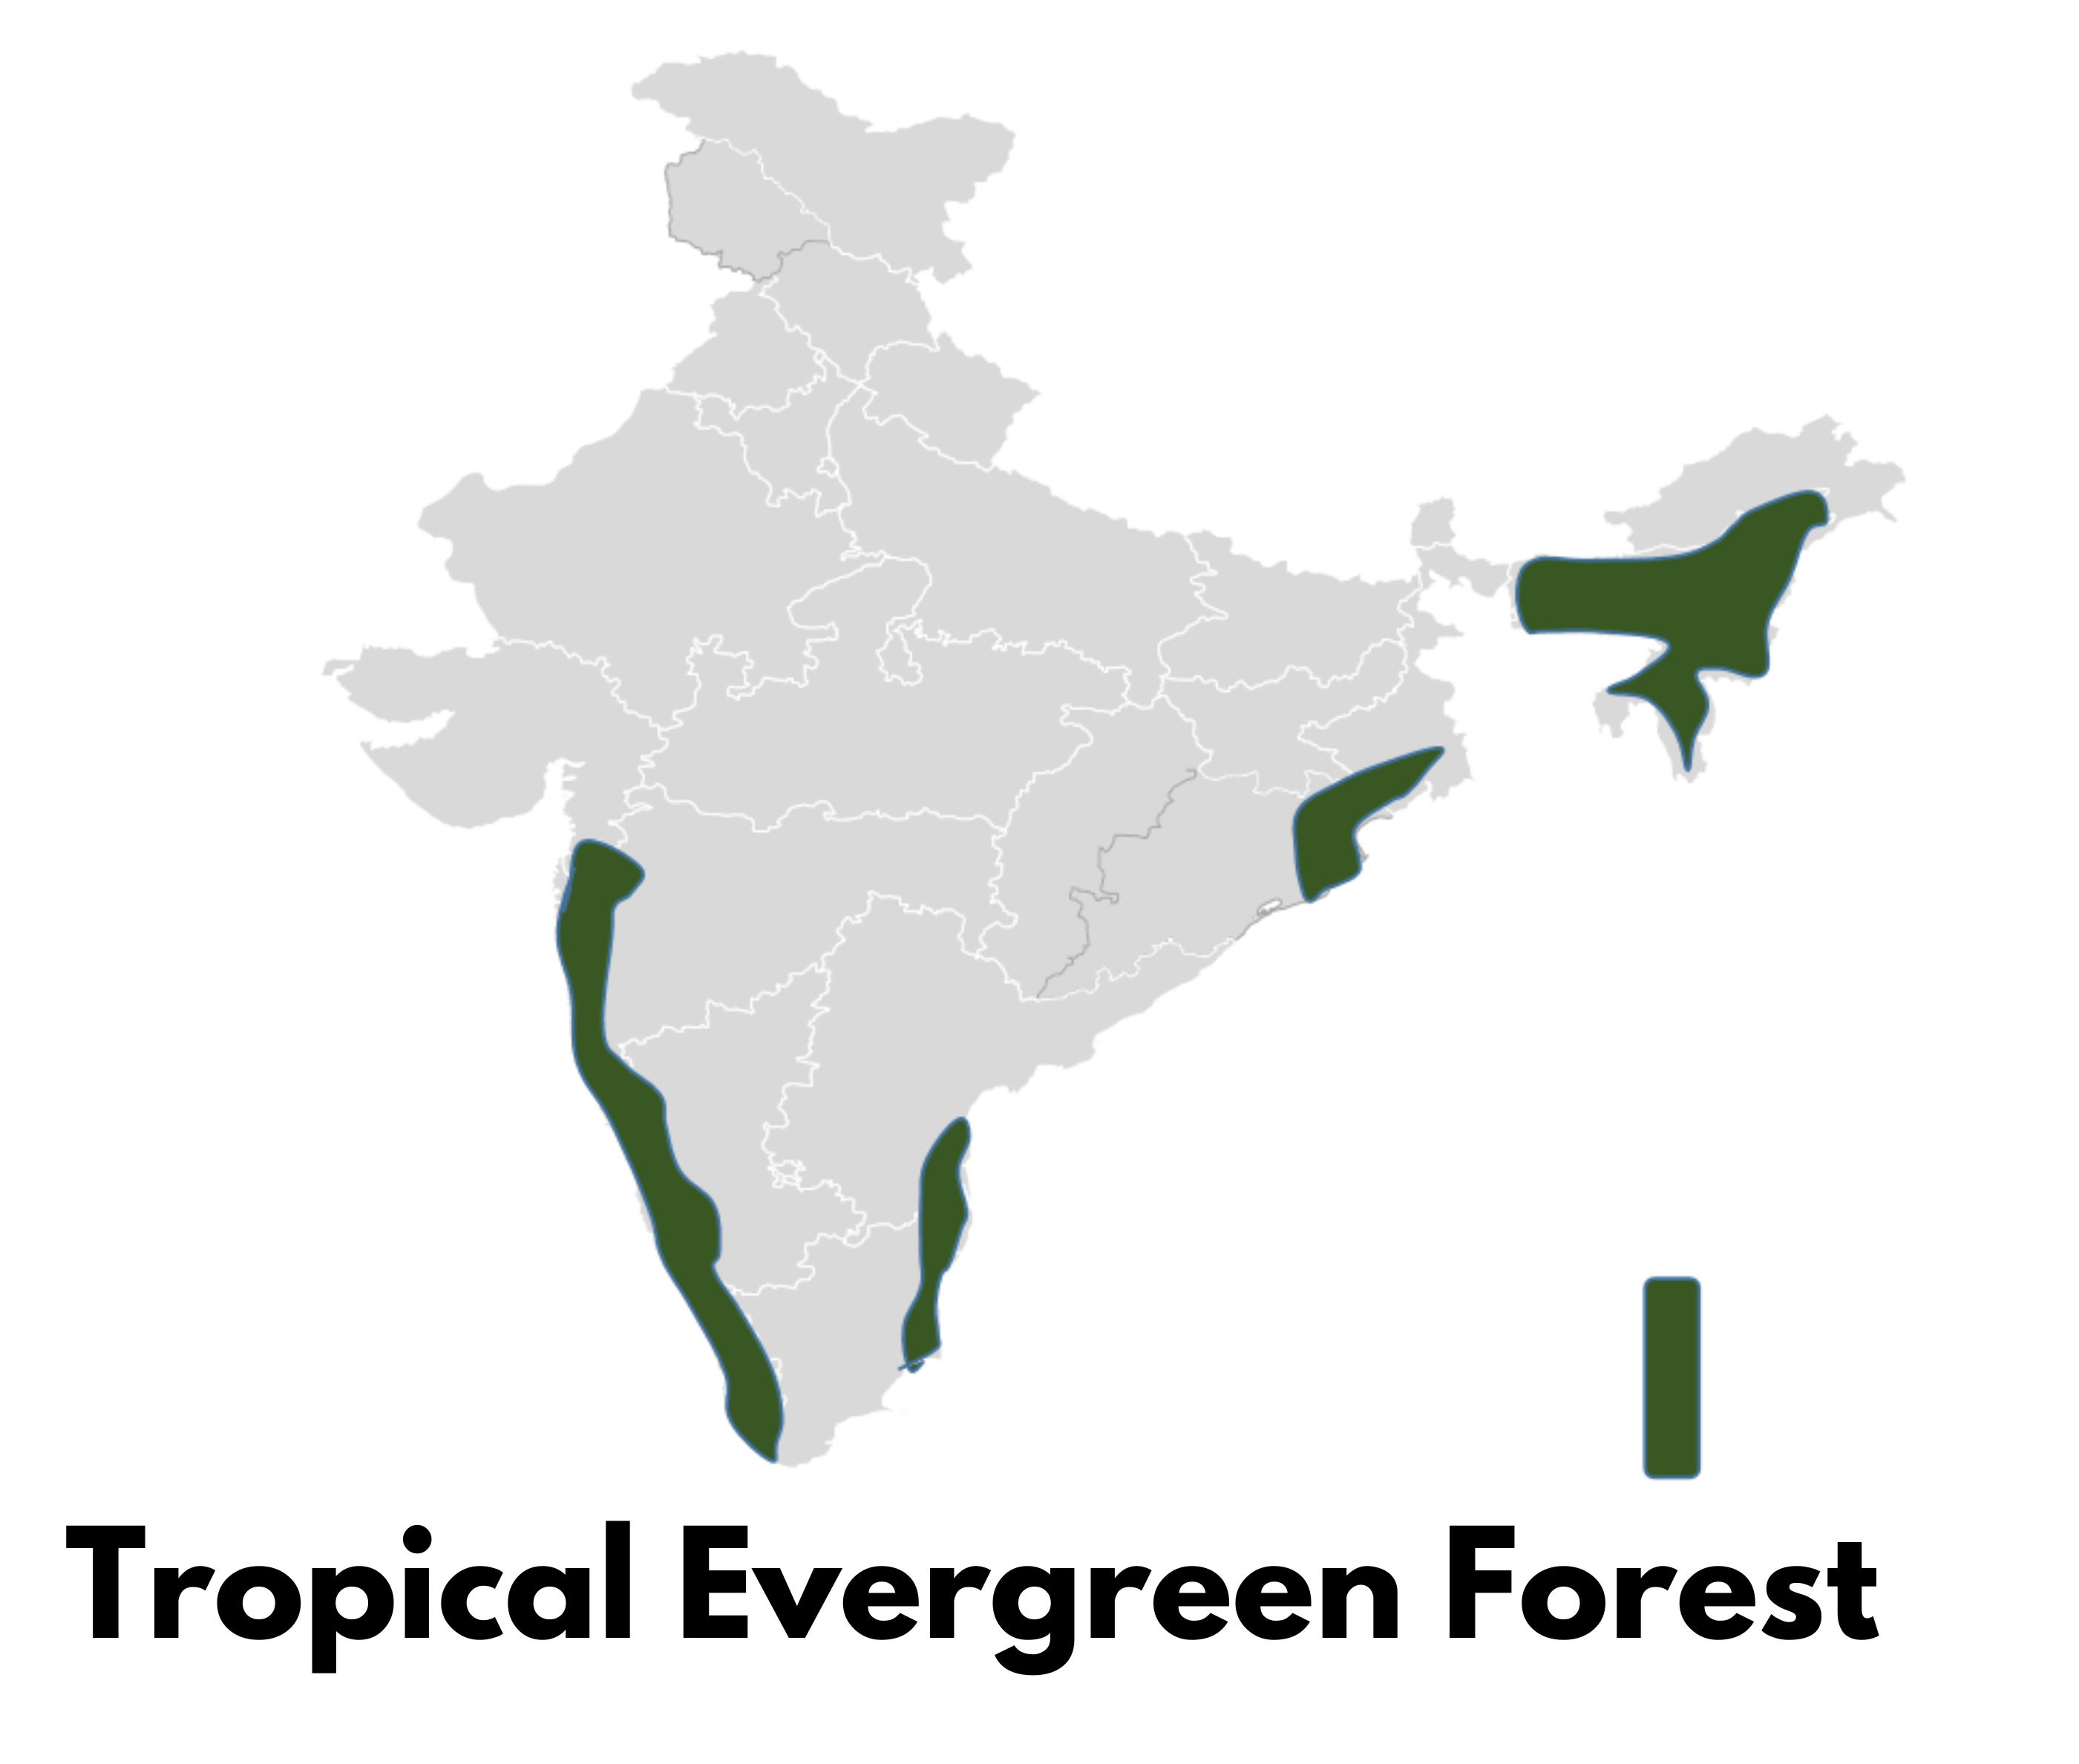 Tropical Evergreen Forest (Areas in India)